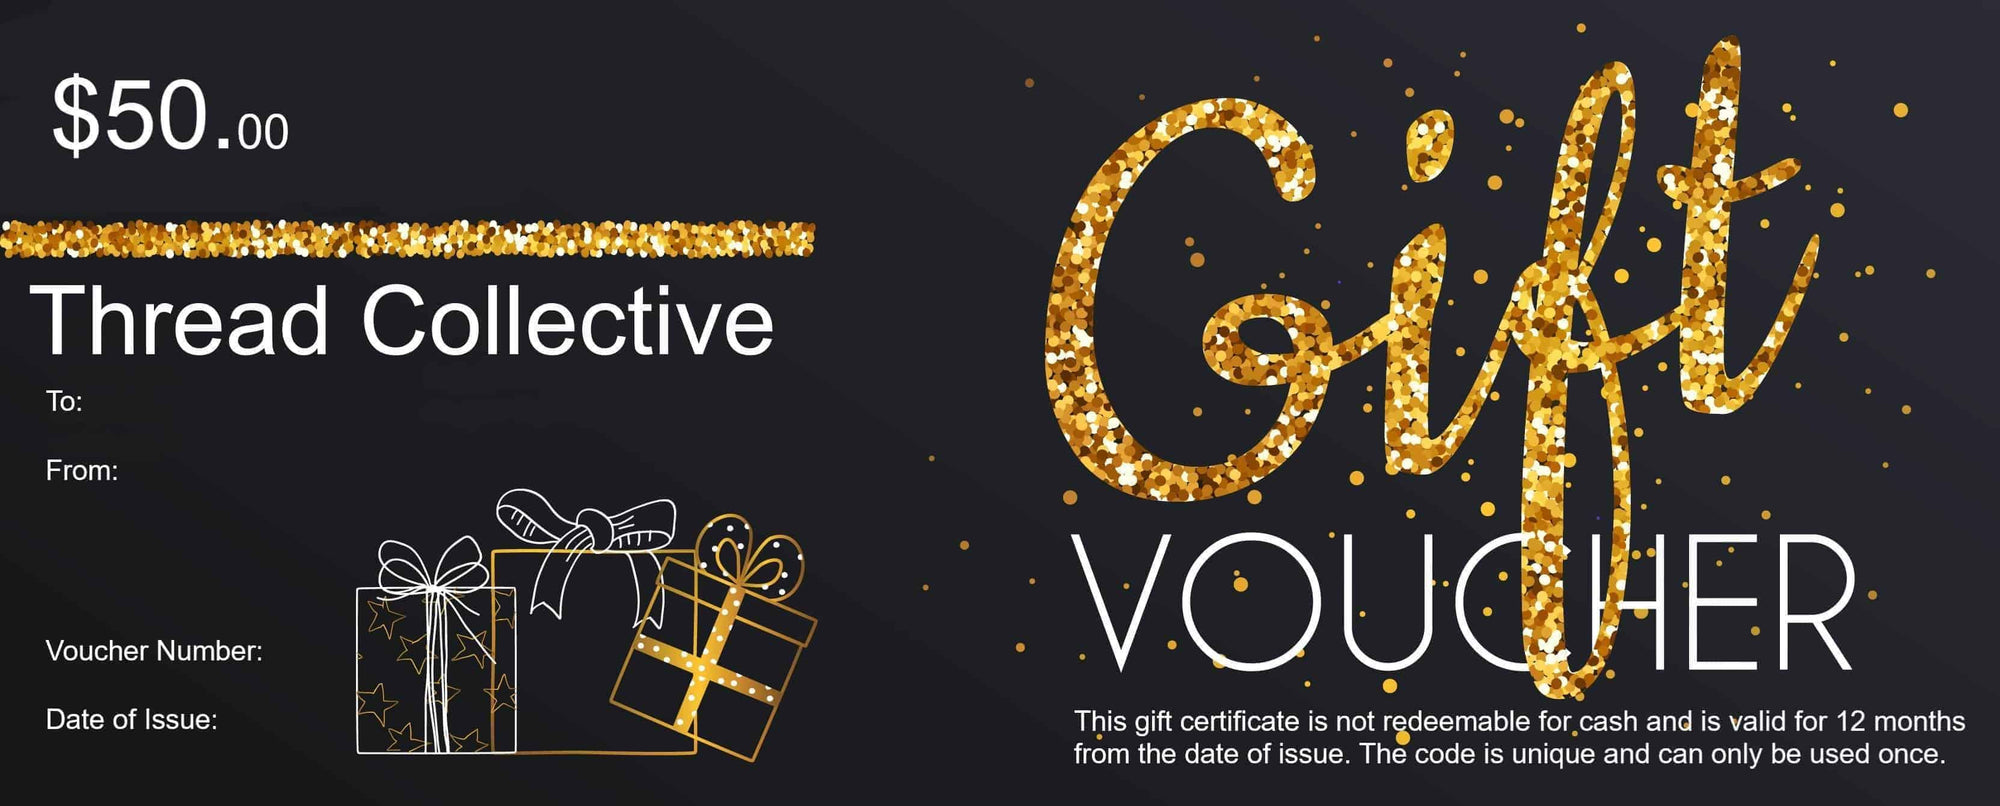 Gift Voucher from Thread Collective